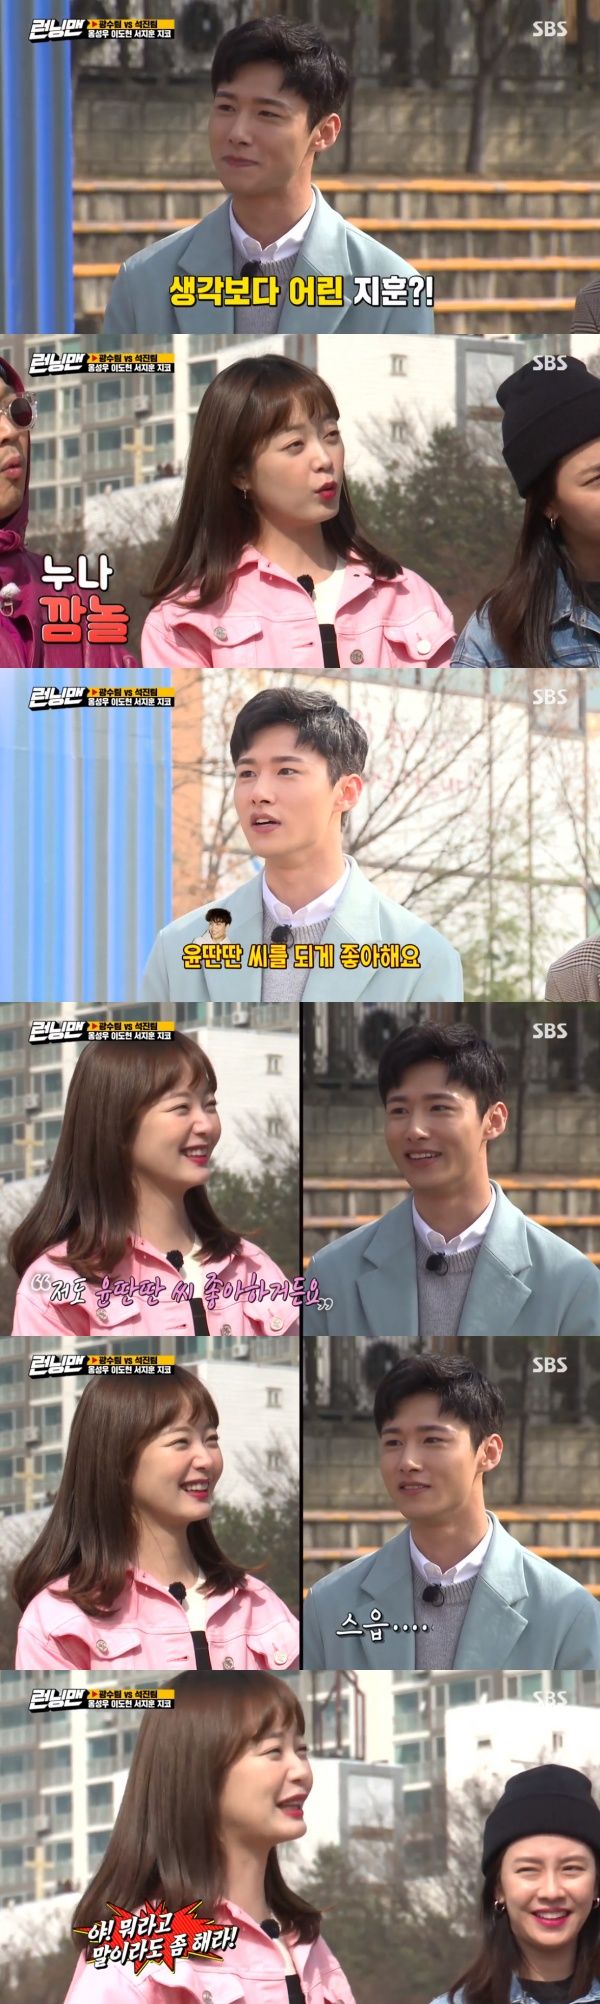 Running Man Seo Ji-hoon and Jeon So-min found common ground with a lush.On the 29th SBS entertainment program Running Man, Zico, Lee Do Hyun, Seo Ji-hoon and Ong Sung Woo appeared and played Race of the Center.On that day, Seo Ji-hoon introduced a new actor named Seo Ji-hoon; Yang Se-chan noted that Mr. Seo Ji-hoon is young.Im 24 now, Seo Ji-hoon said.In response, Yoo Jae-Suk showed interest in Seo Ji-hoon, who asked, What is the interest of Seo Ji-hoon these days?Seo Ji-hoon replied, I like to be a good Mr. Yoon. Yoo Jae-Suk said, Somin is emotional.Jeon So-min also laughed, saying, I like it a lot too. But Seo Ji-hoon did not respond much, so everyone laughed.So, Jeon So-min added, Hey, say something, what am I?Lee Kwang-soo advised, Its amazing. Yang Se-chan said, Do something like I have something to do with me.I dont know why everyone hits the wall like this when (guests) come, said Jeon So-min.